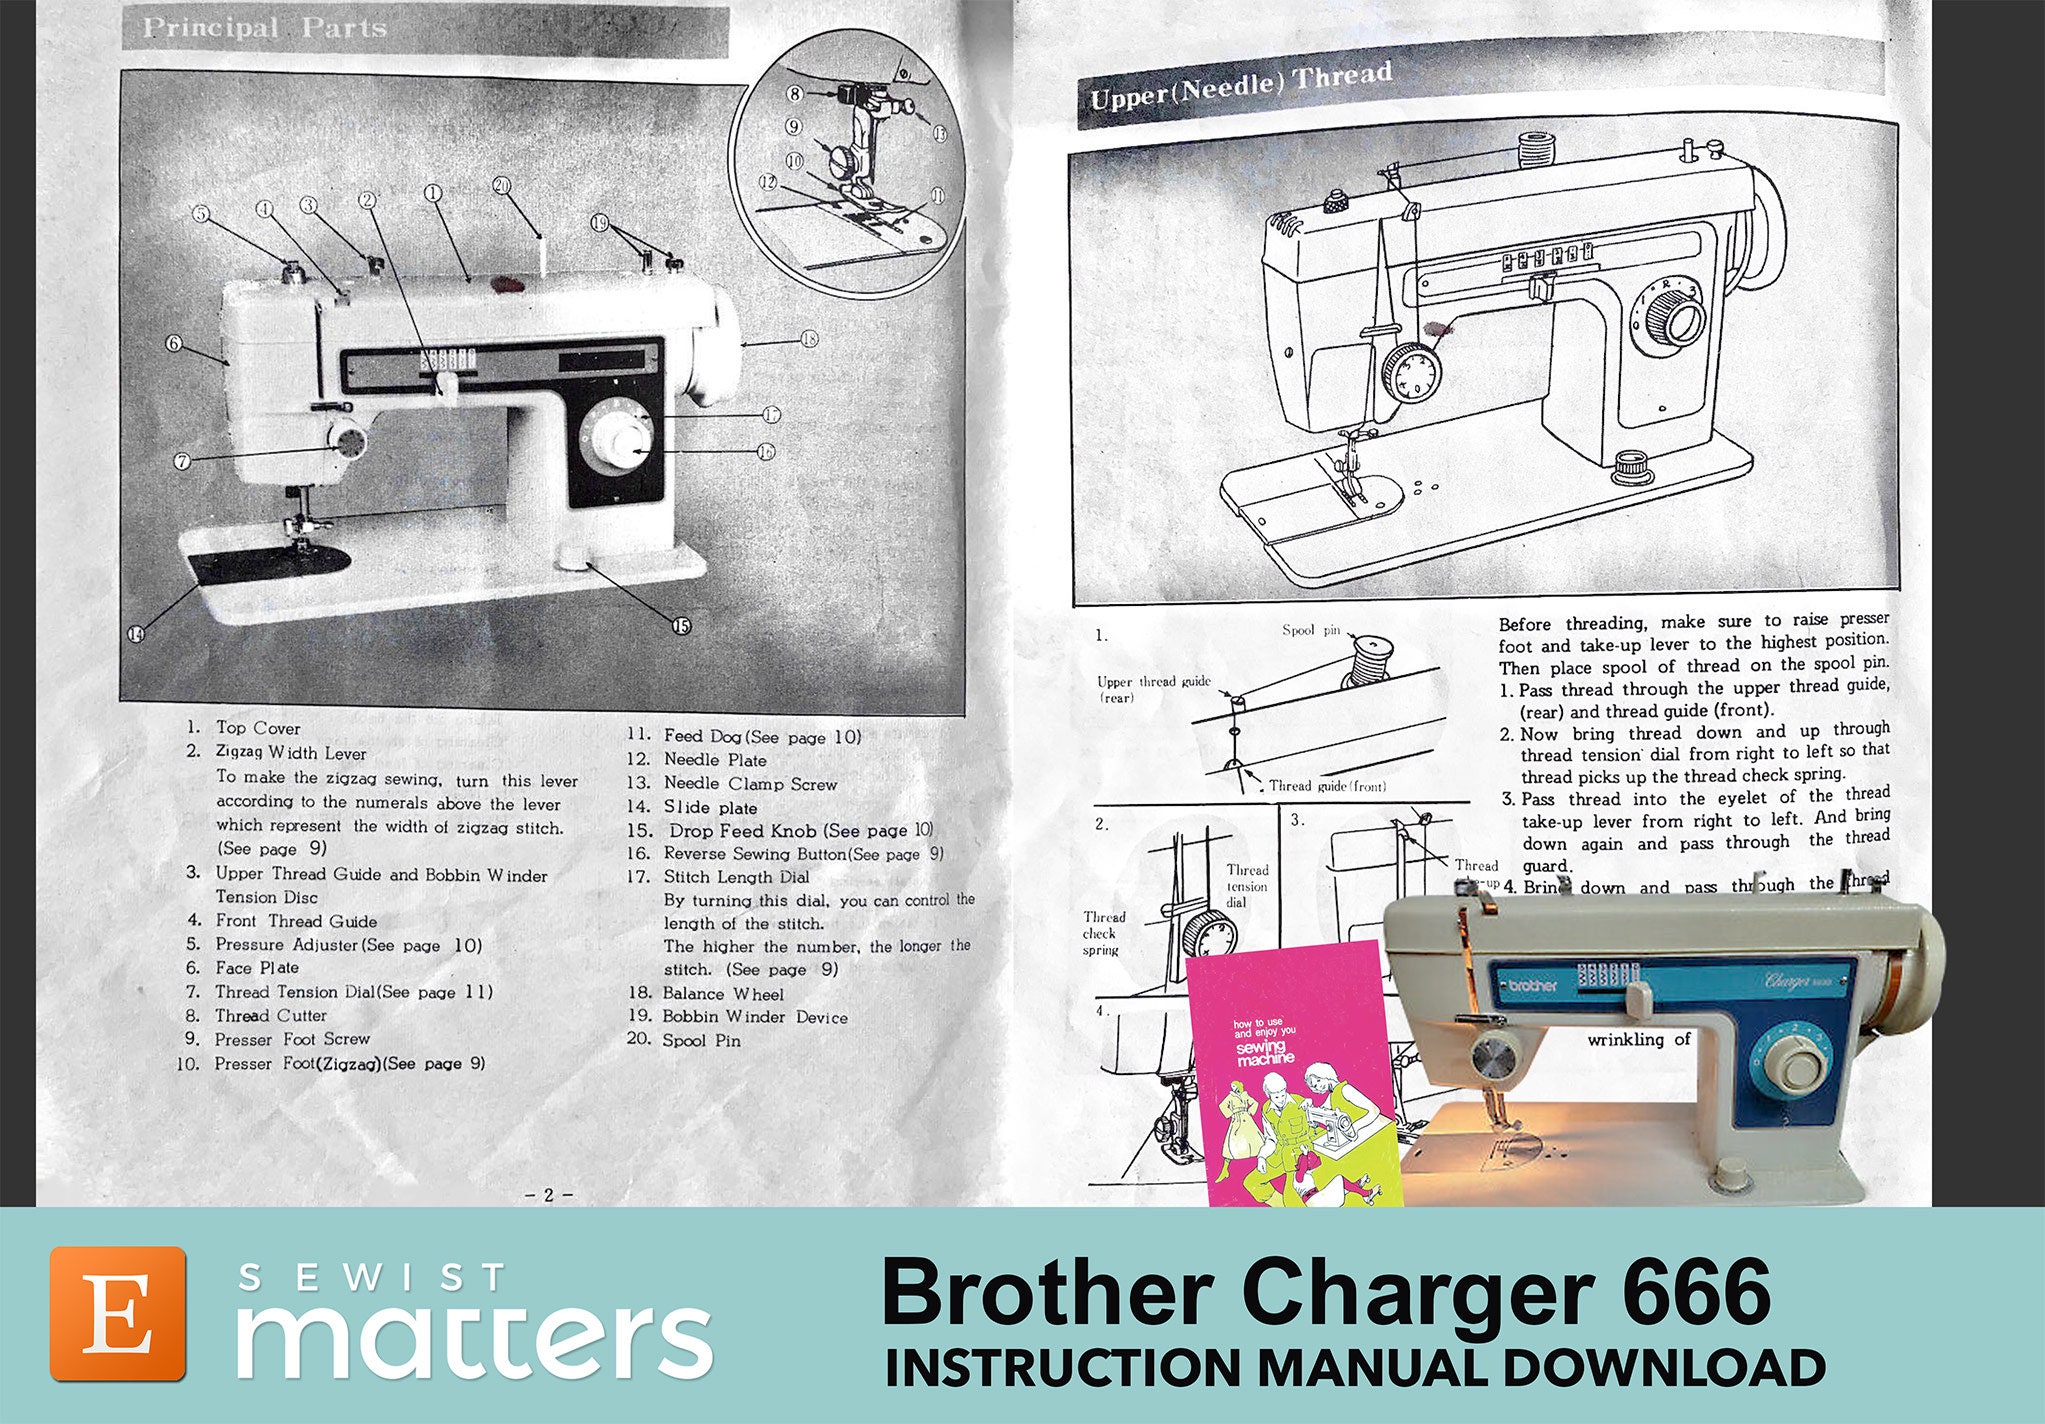 Introducir 34+ imagen brother charger 666 sewing machine manual